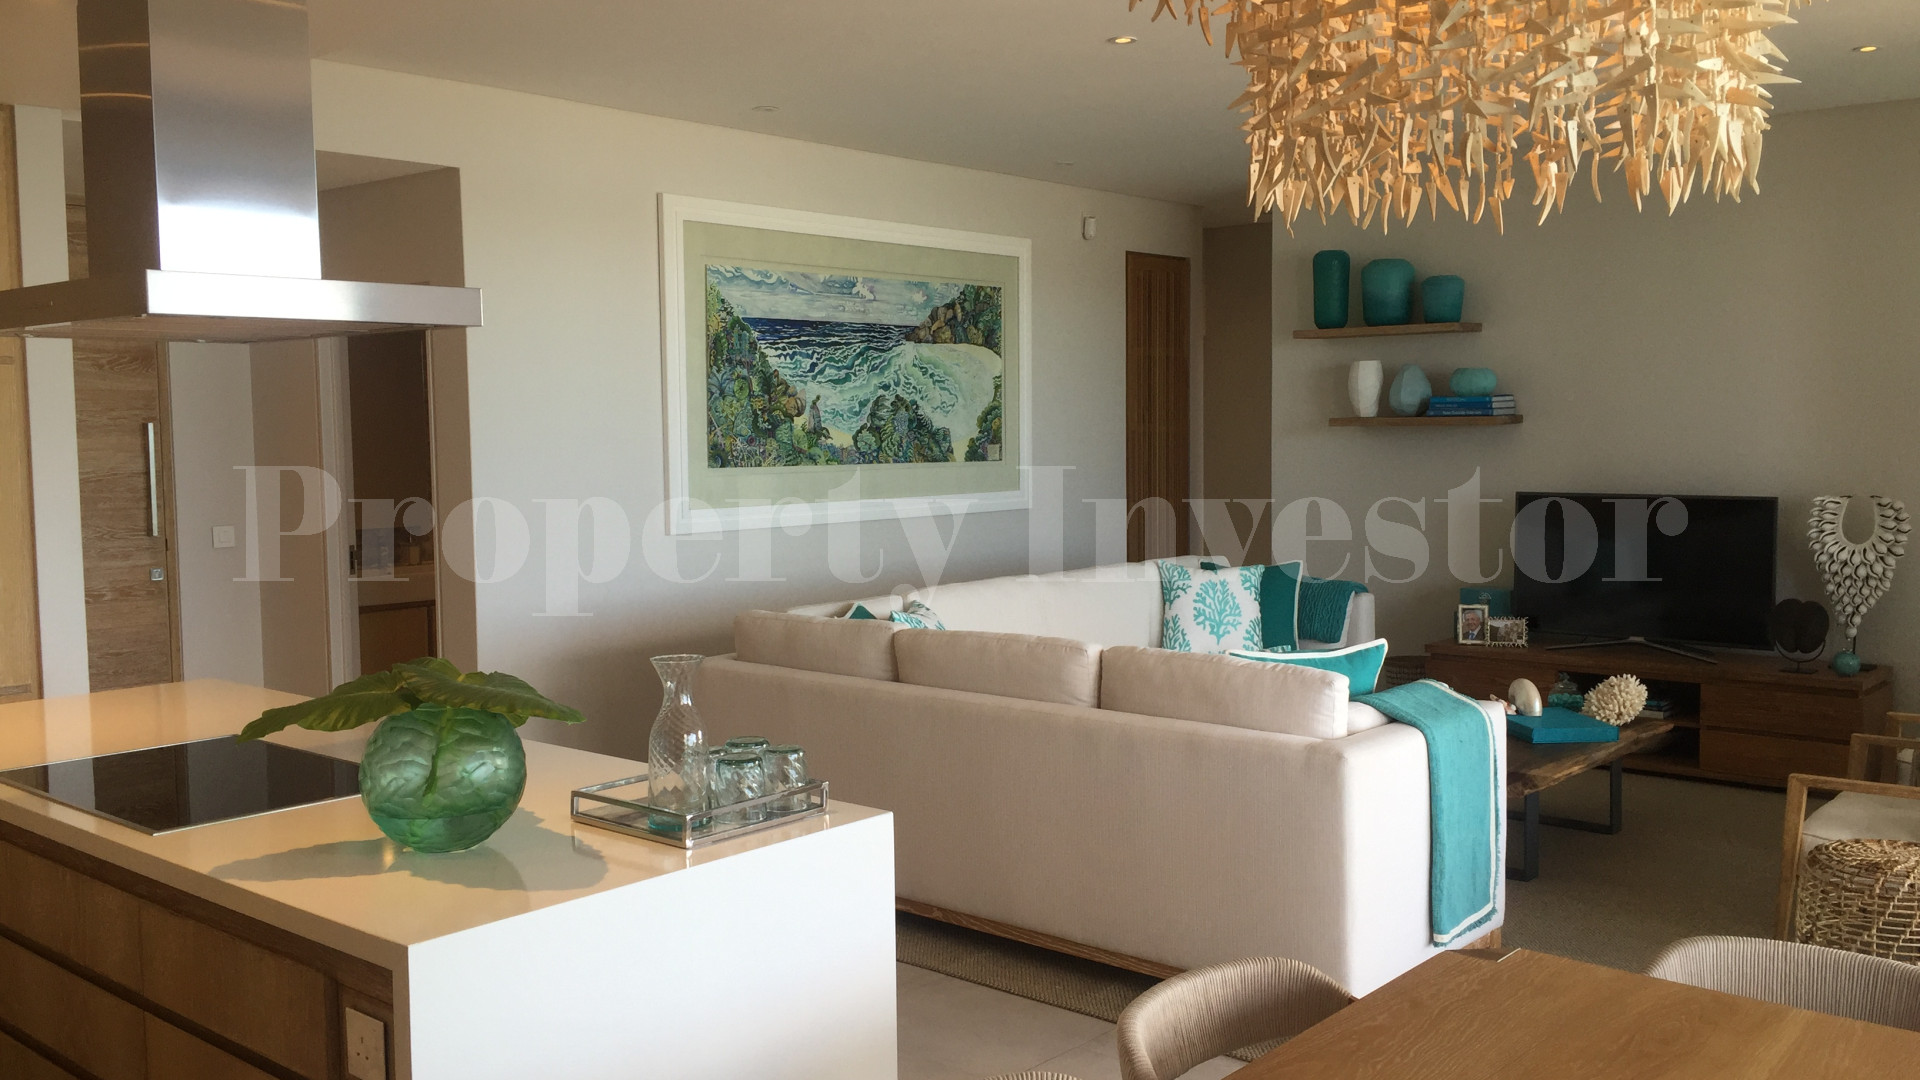 3 Bedroom Luxury Apartment with Award-Winning Design for Sale in Seychelles